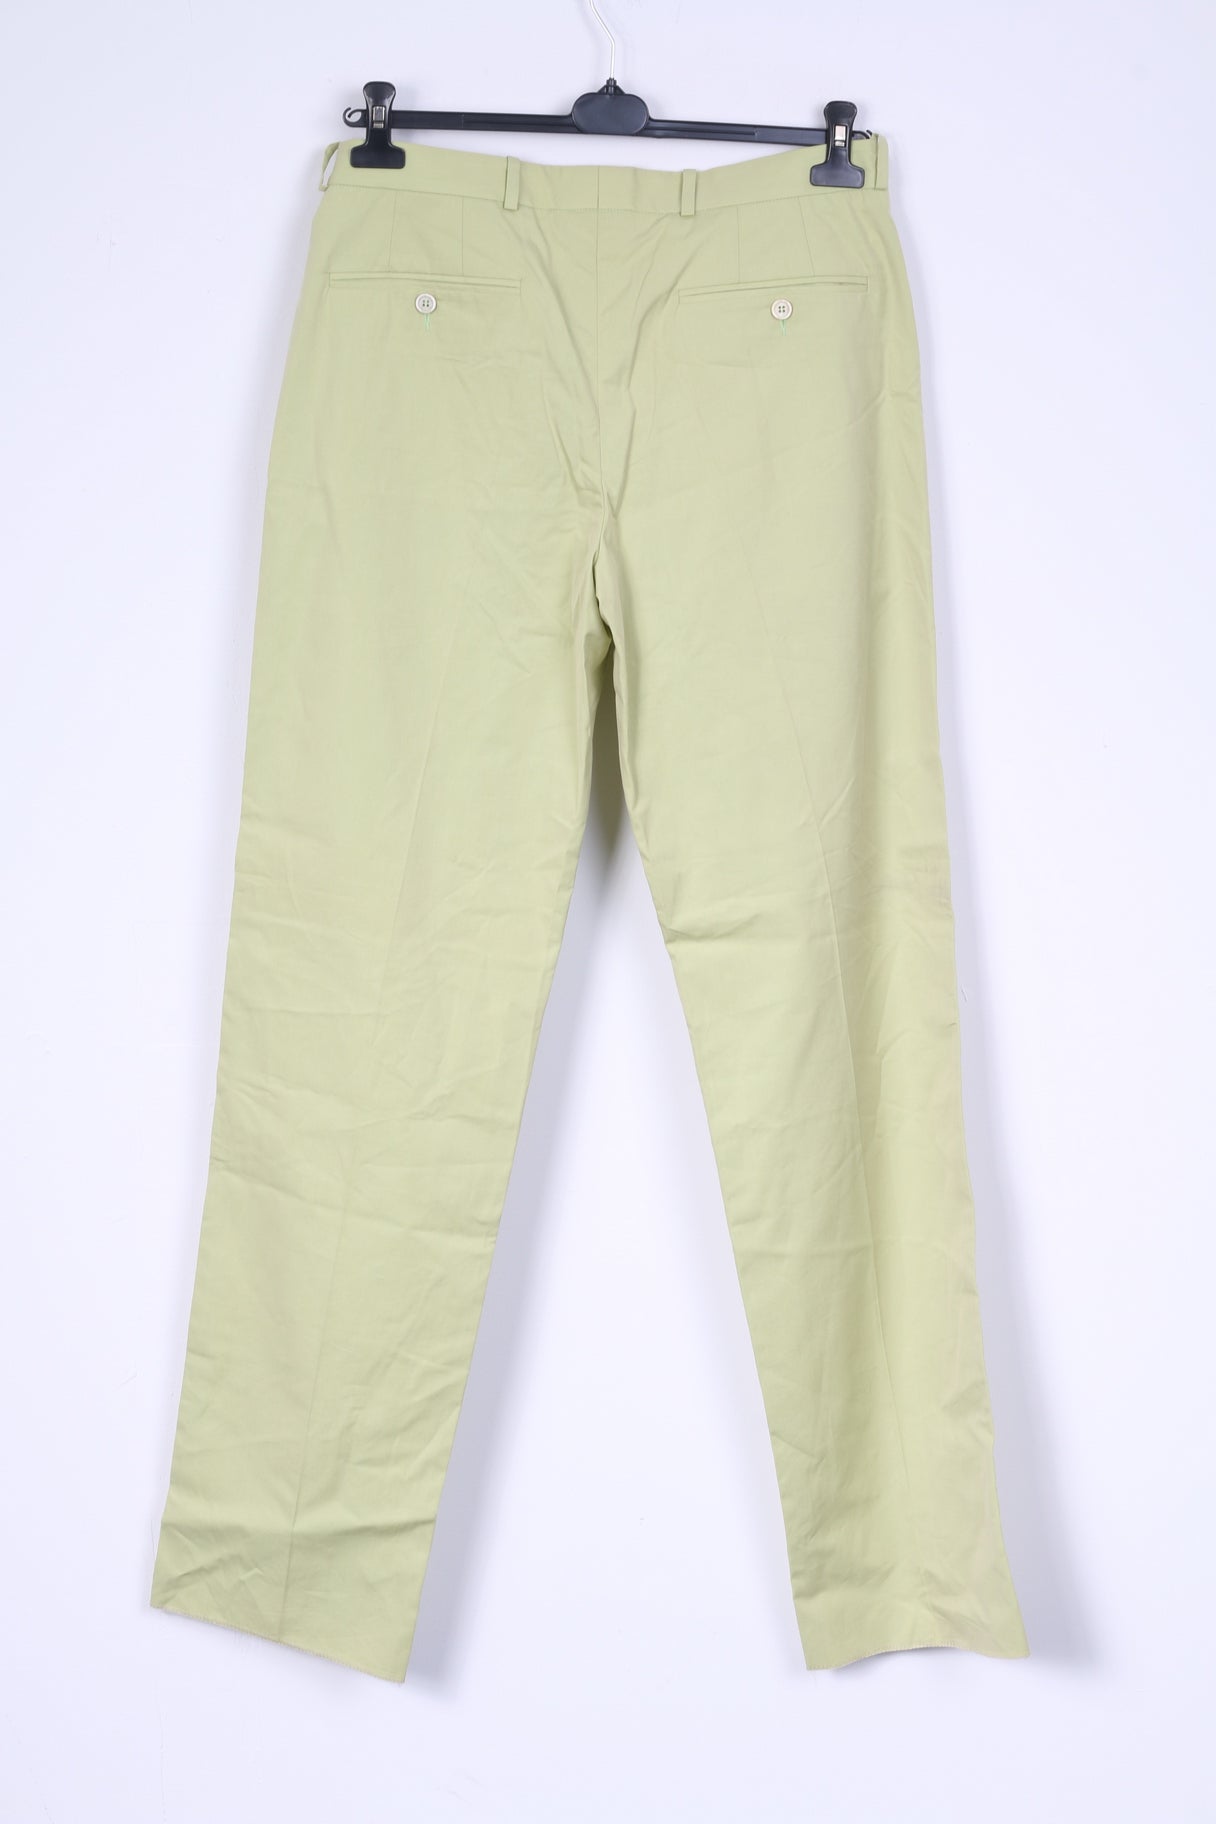 New Versace Mens 50 Trousers Olive Cotton Elegant Italy Gianni Pants